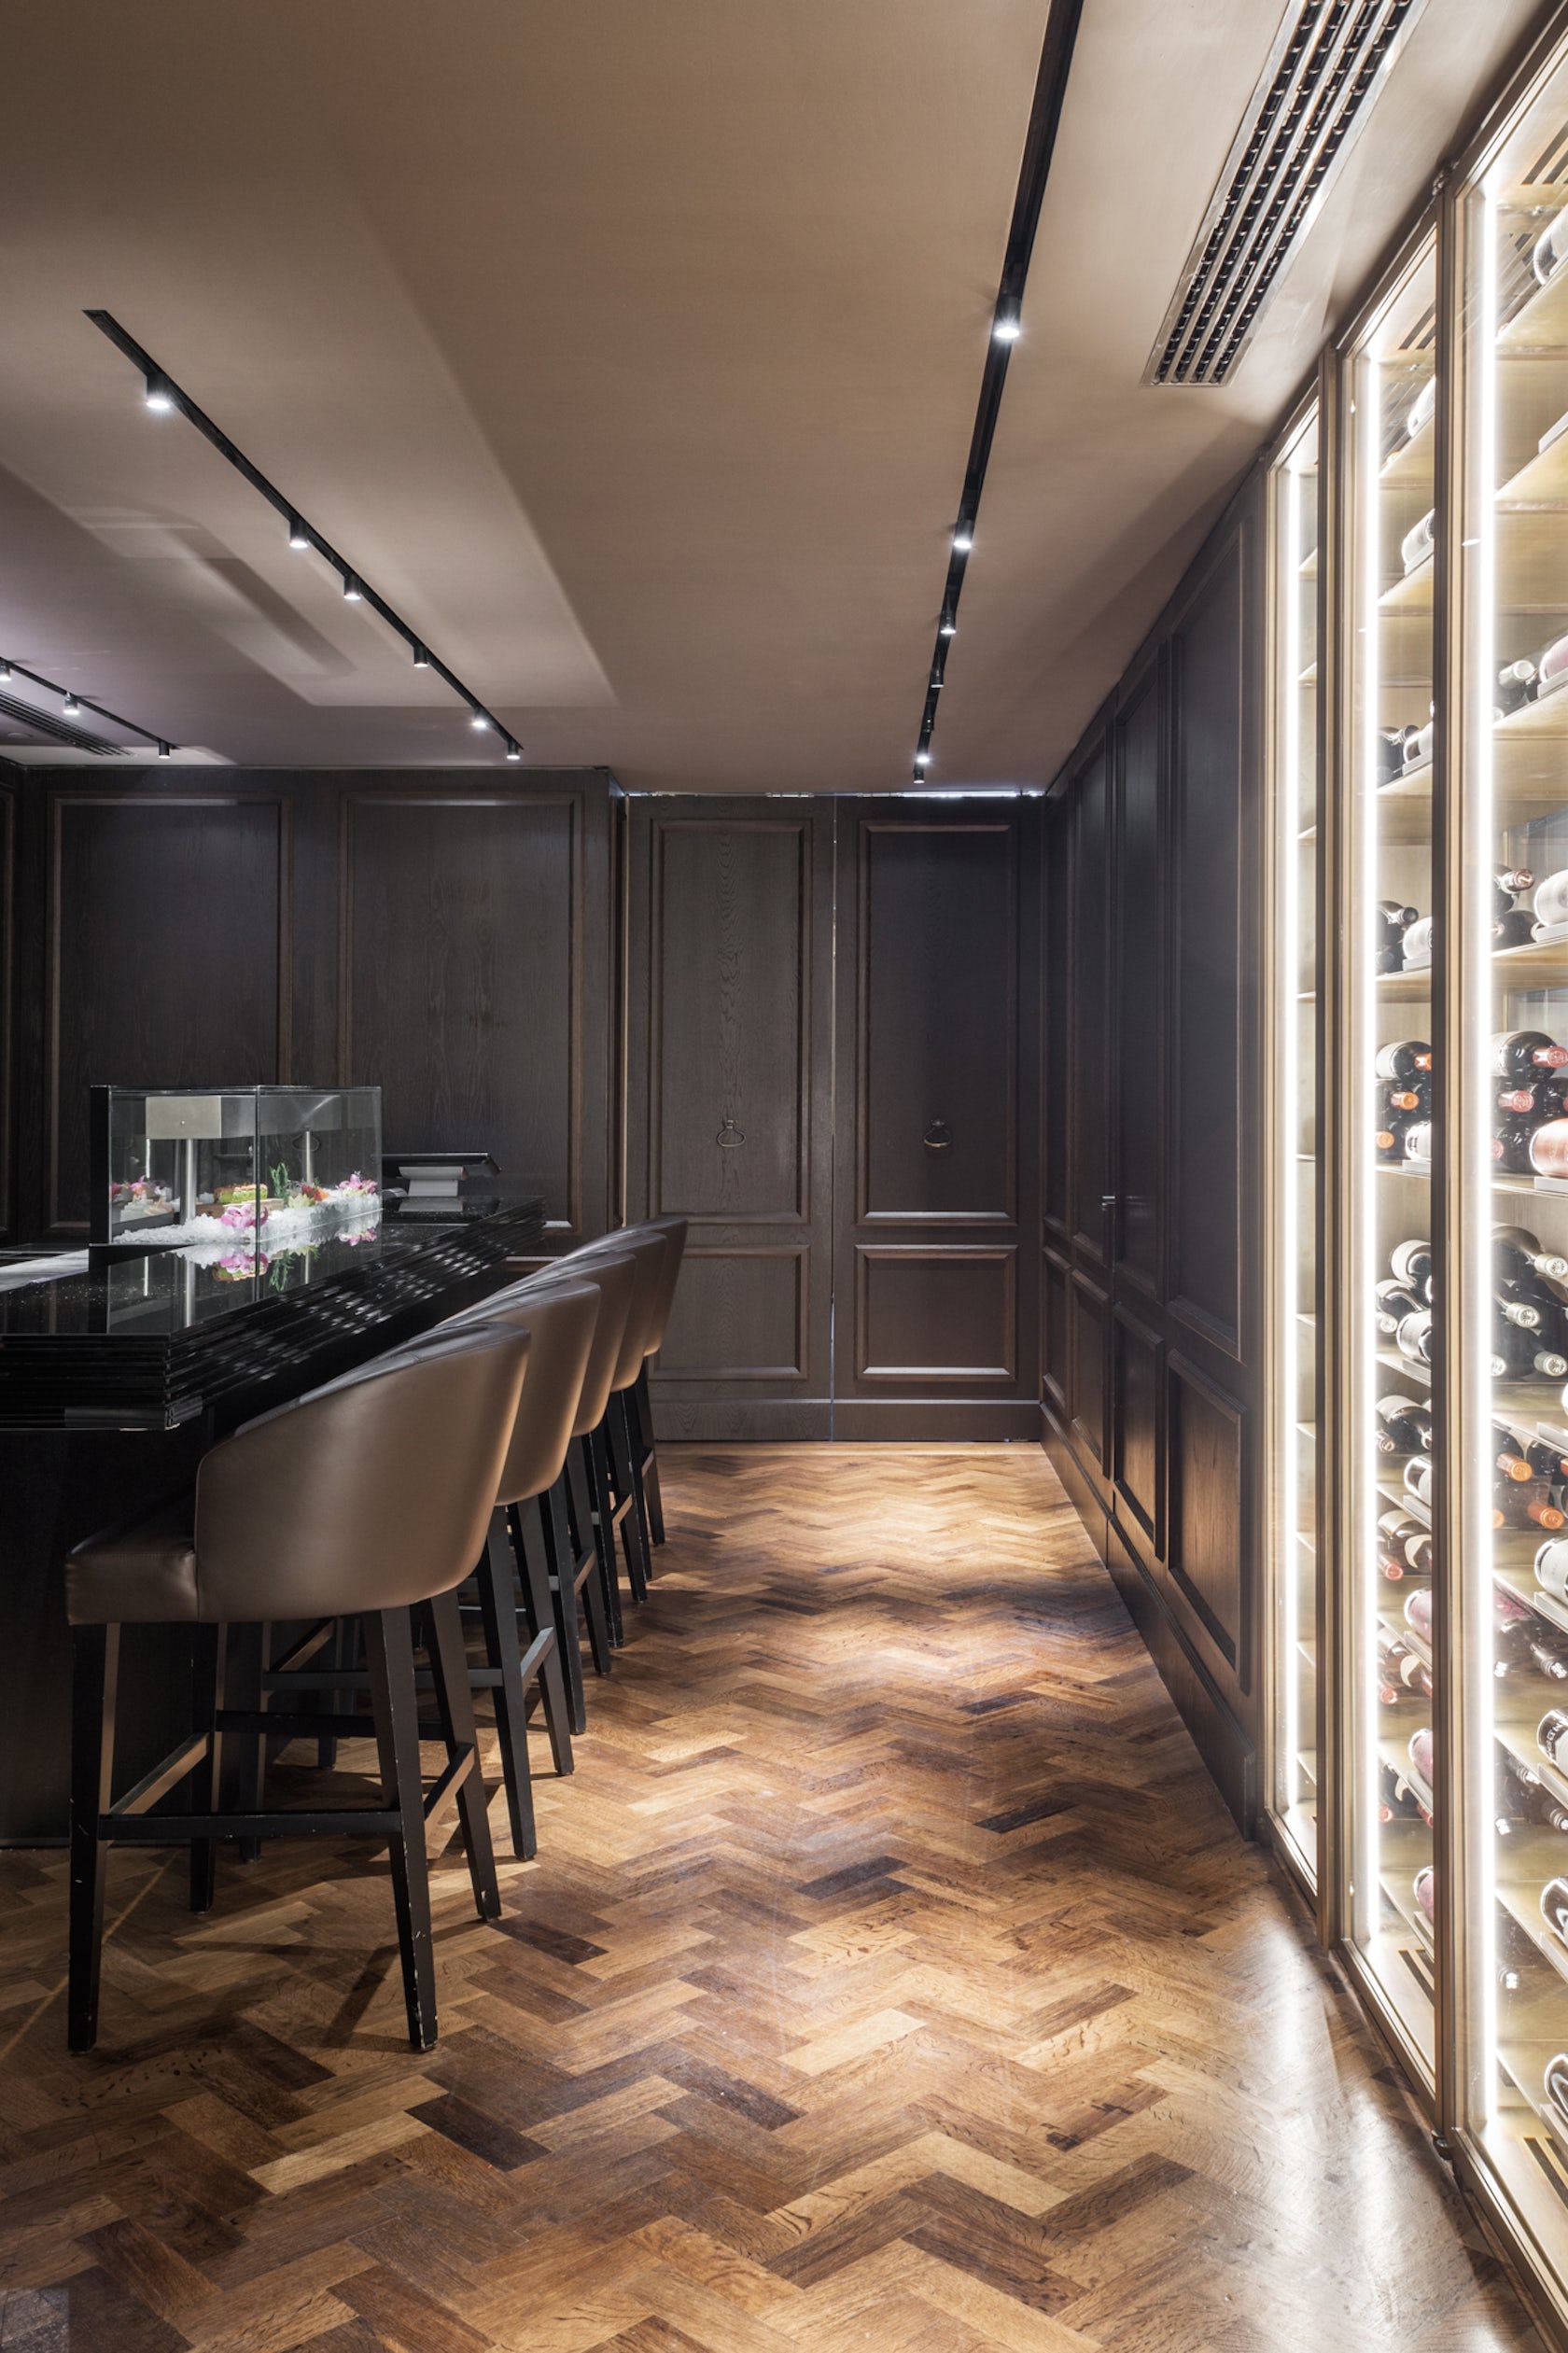 Hotel Cafe Royal By Lissoni Partners Architizer